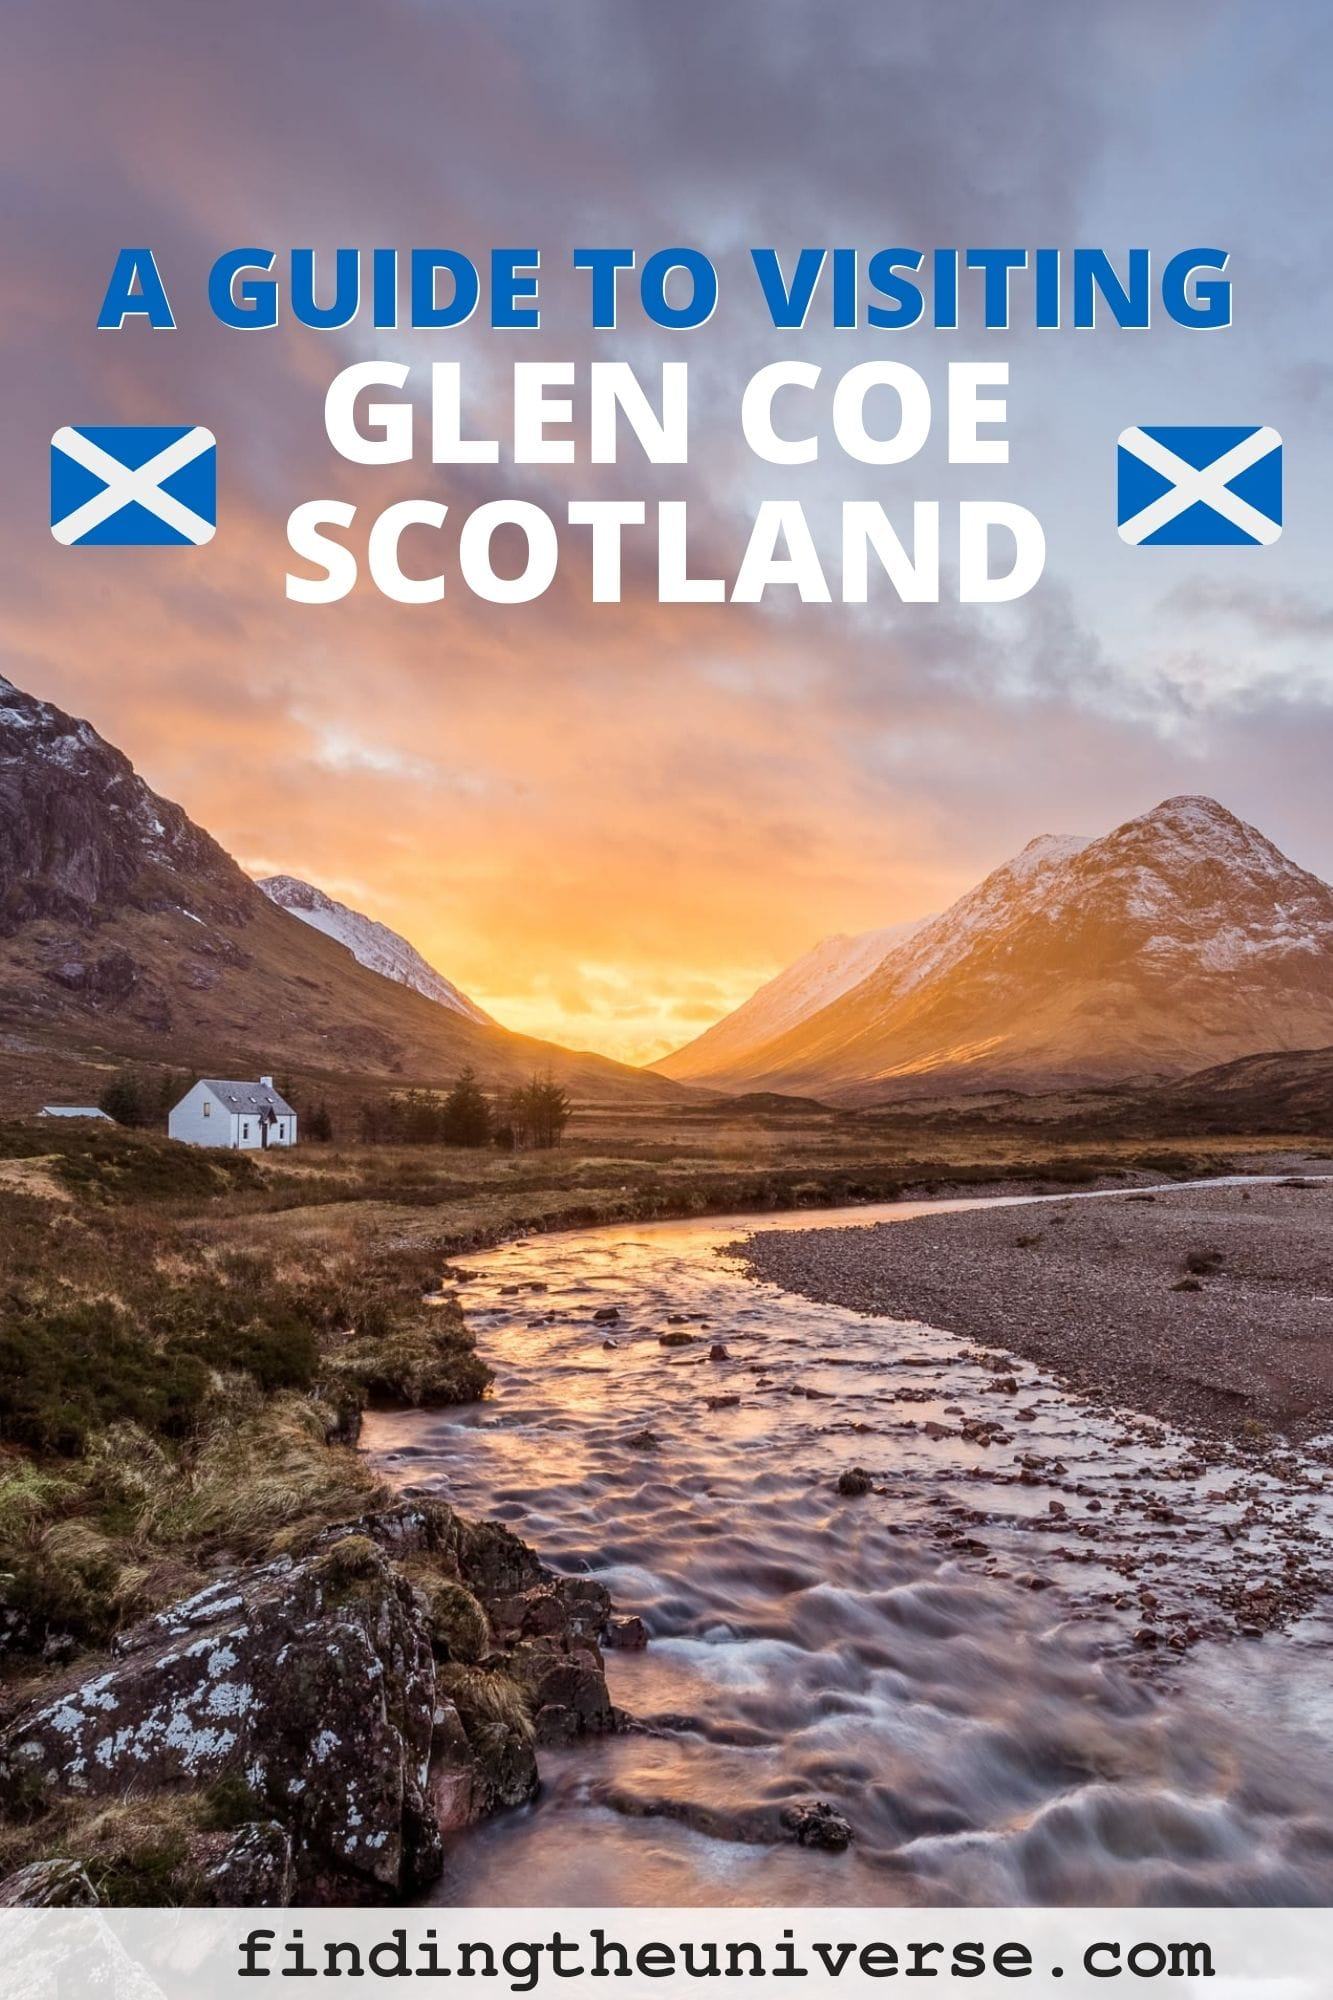 A detailed guide to visiting Glen Coe in Scotland. Guide to things to do in Glen Coe, where to stay in Glen Coe and lots more!